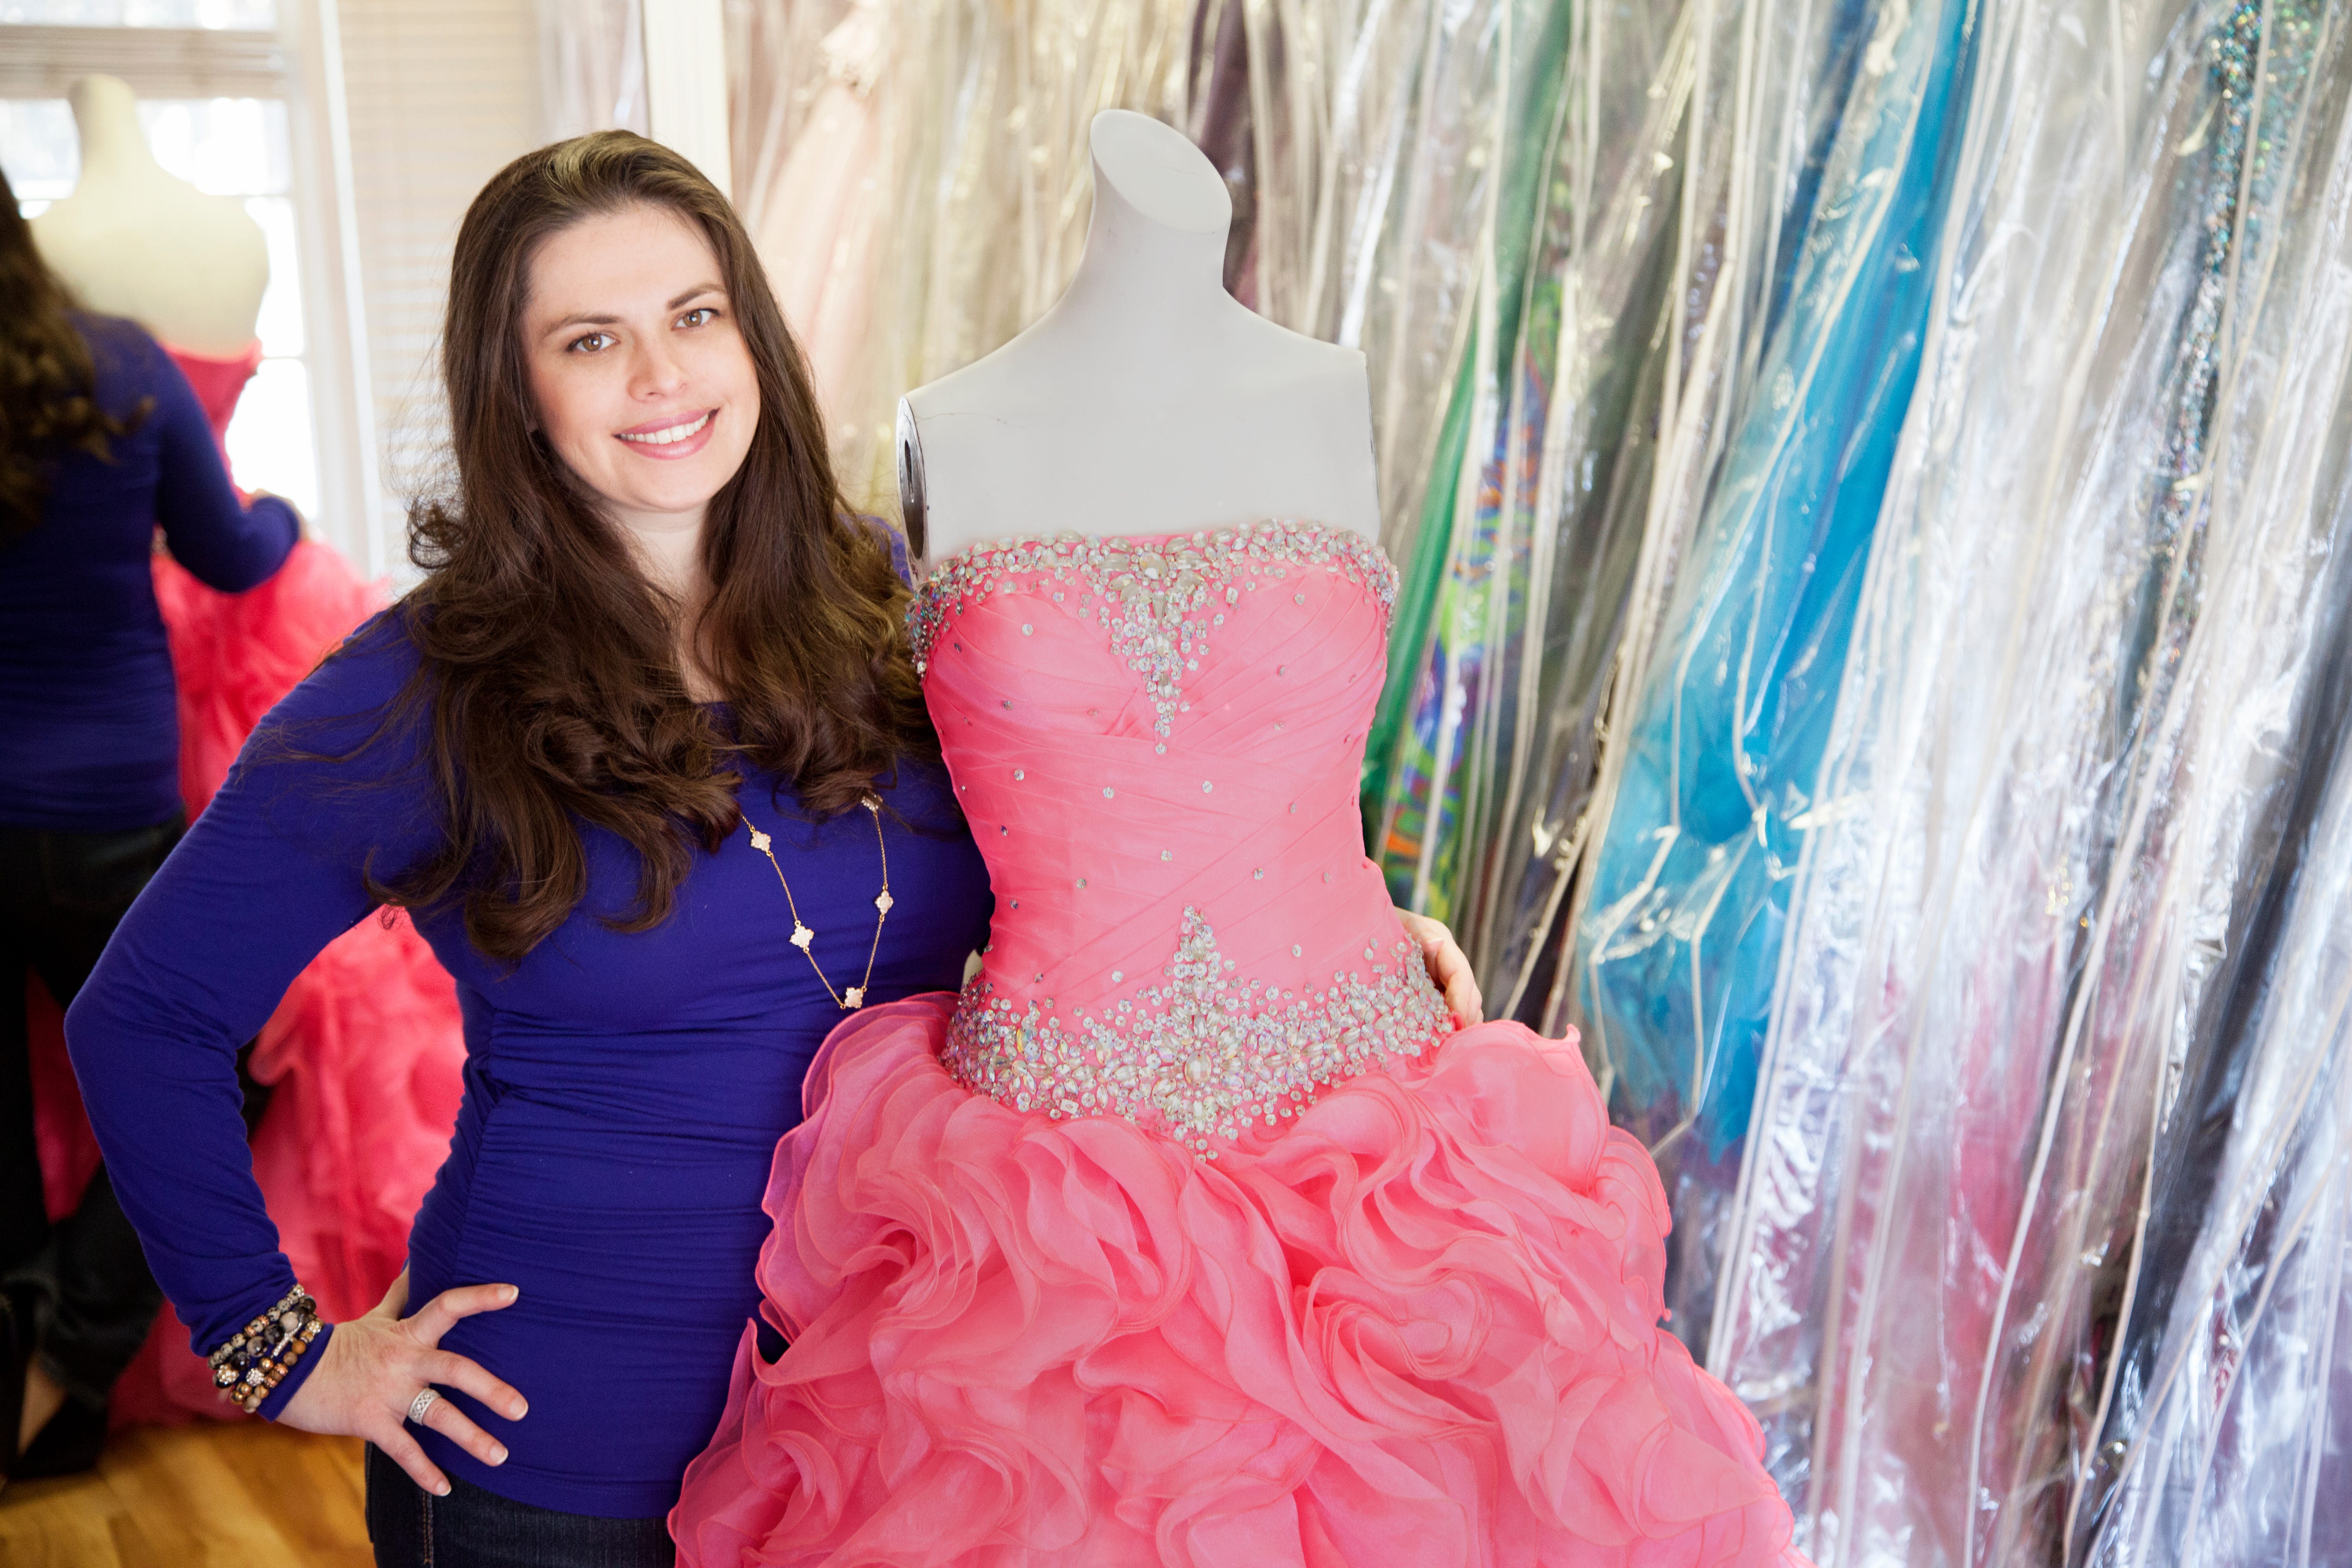 consignment shops that buy prom dresses